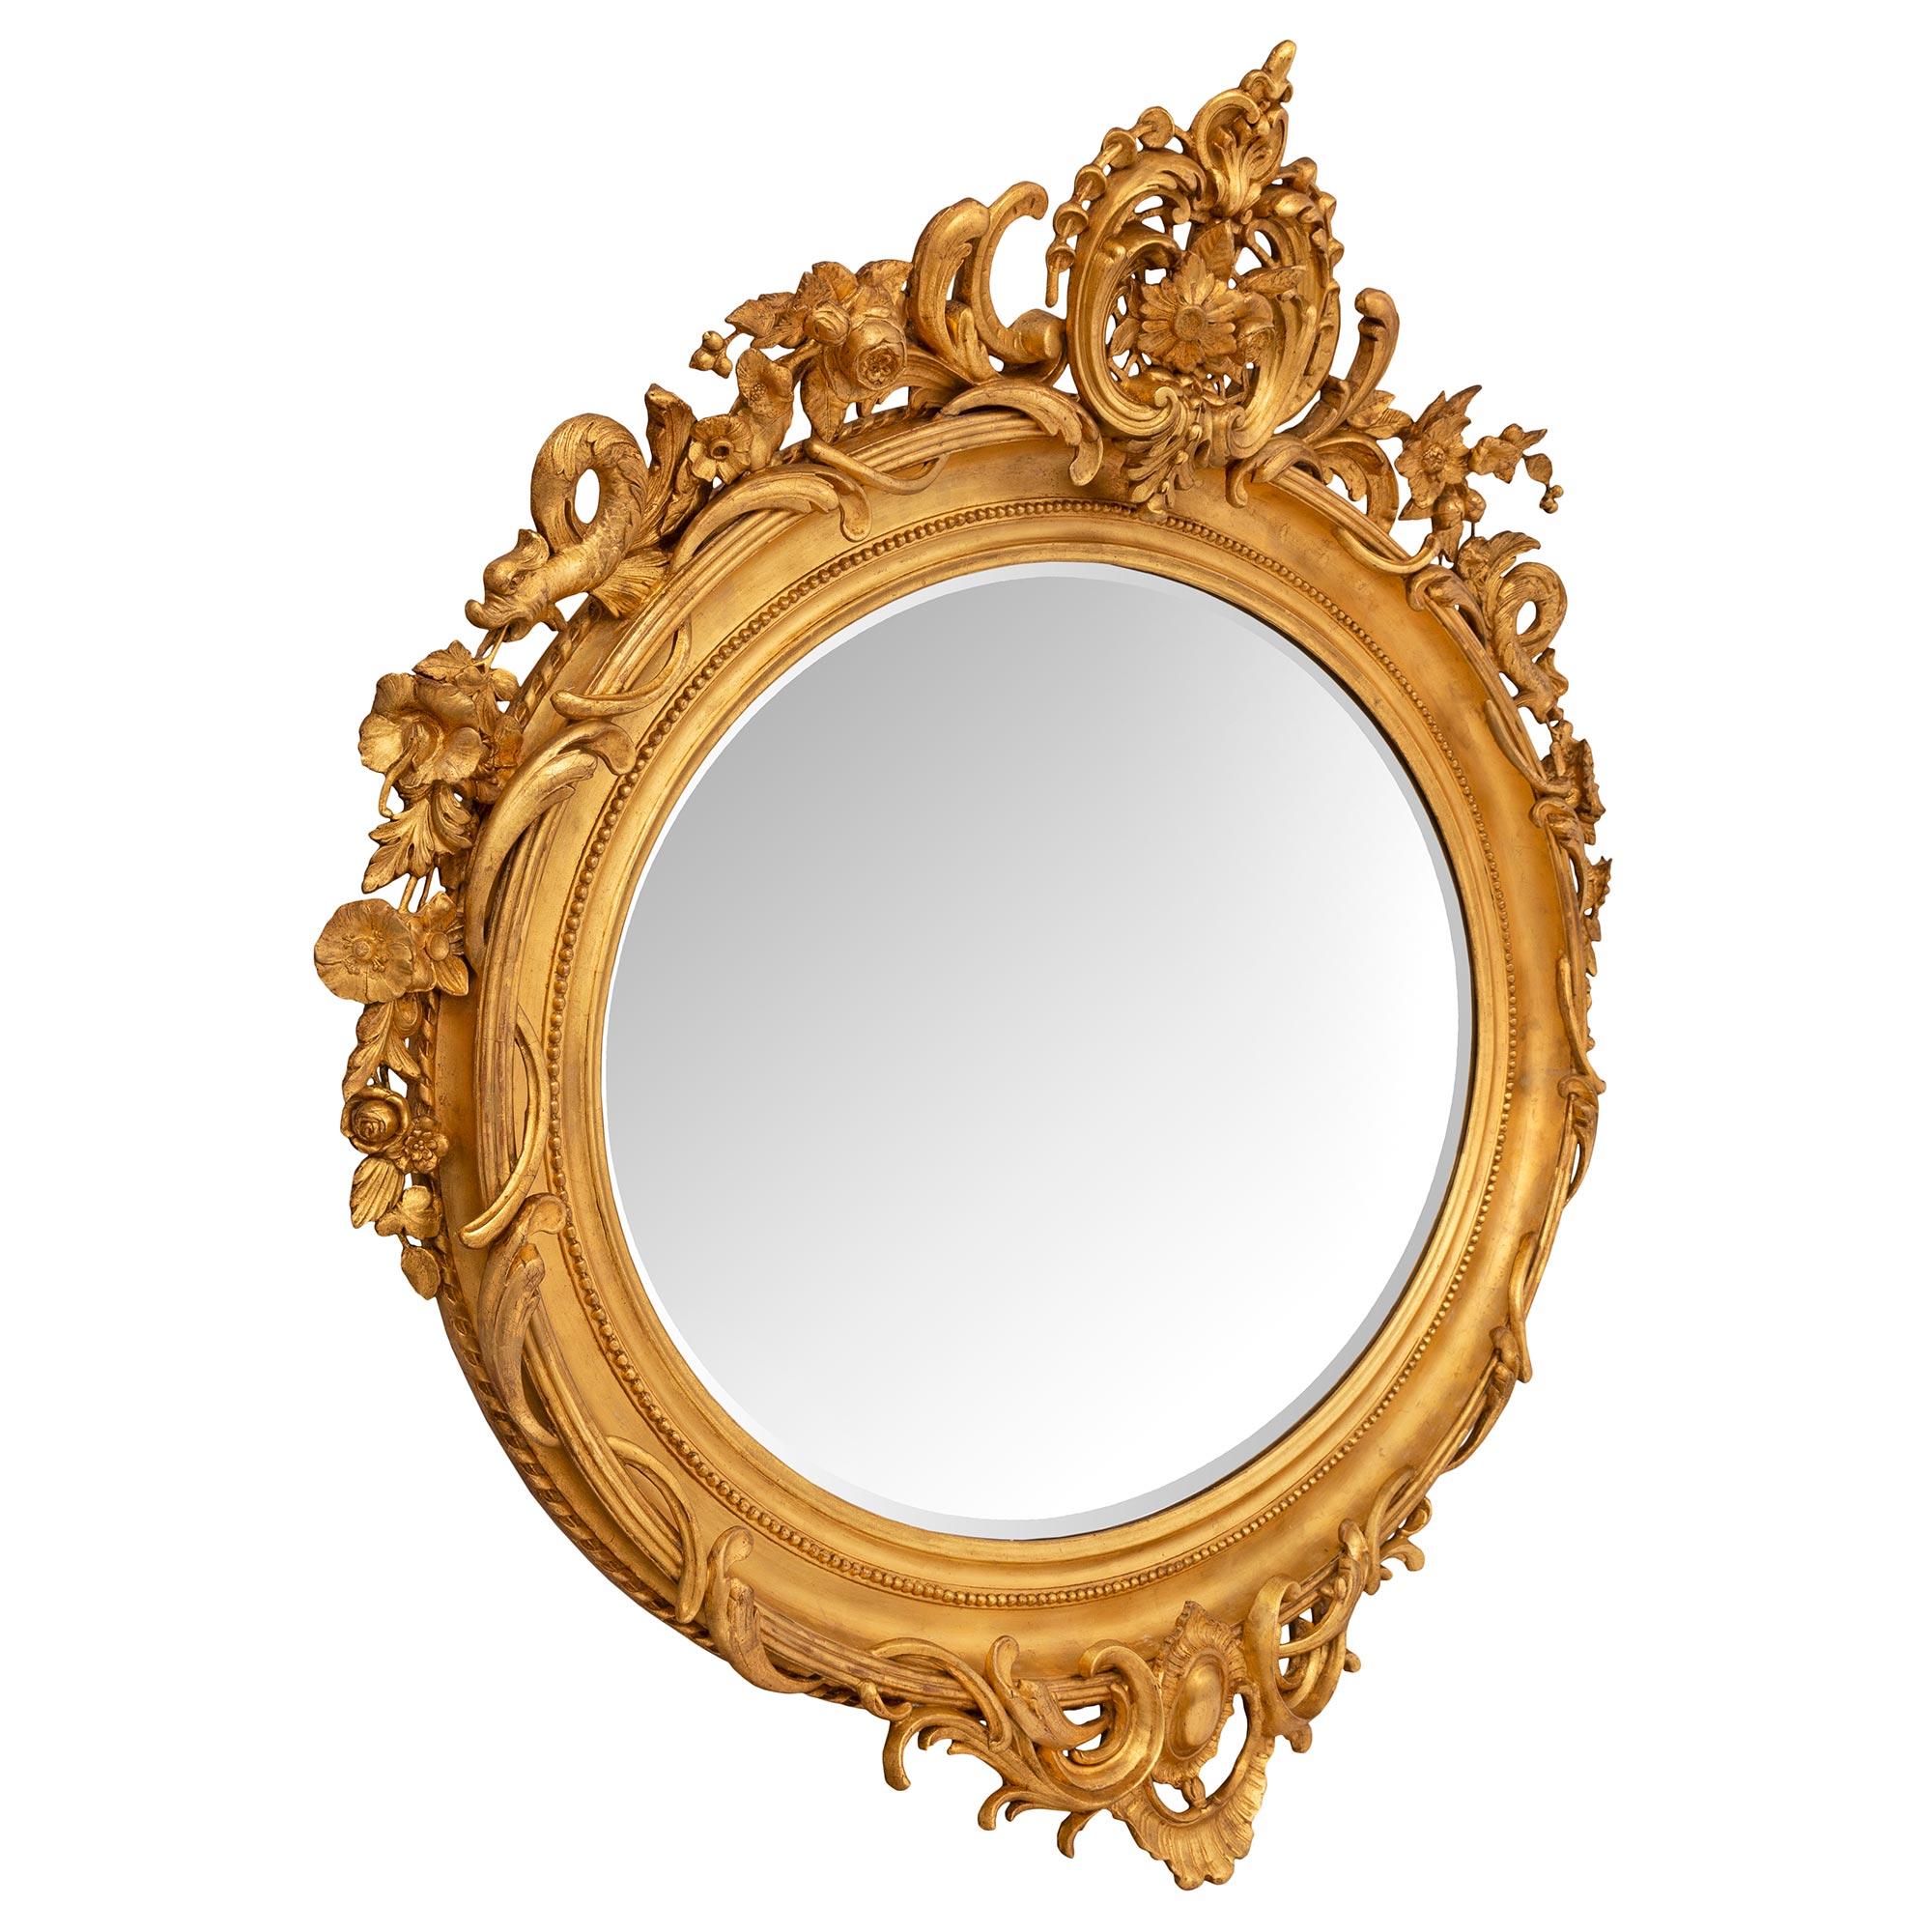 A striking and most impressive French 19th century Louis XVI st. giltwood mirror. The large scale oval shaped mirror retains its original beveled mirror plate set within a mottled giltwood border with a fine wrap around beaded band. Stunning